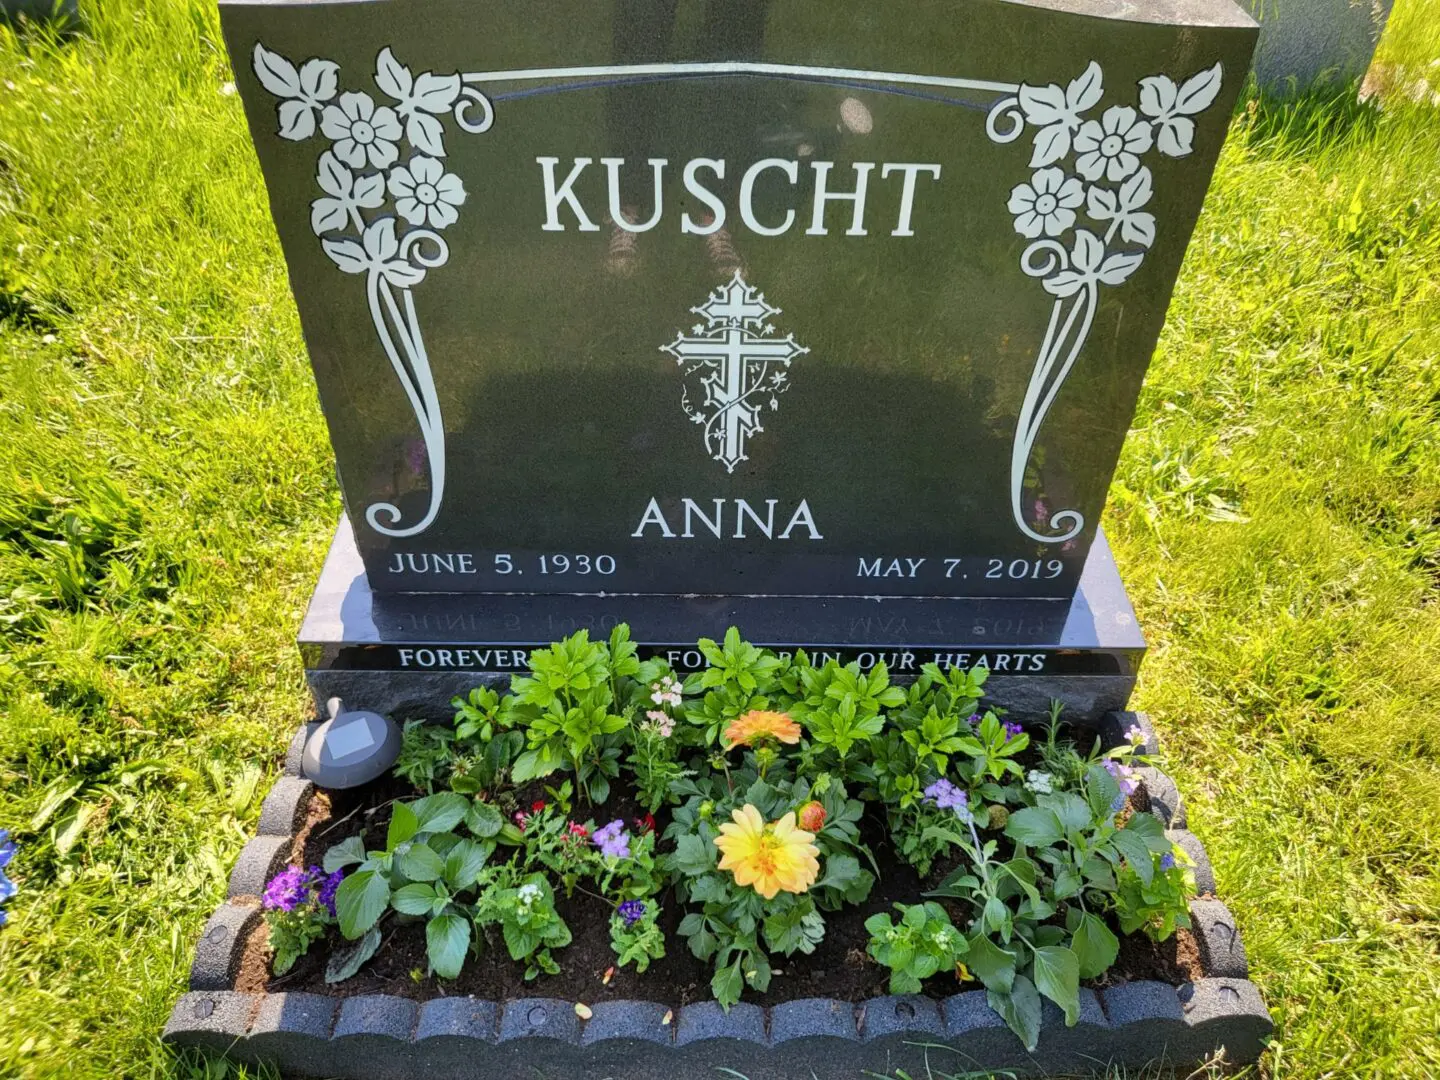 A grave with flowers growing out of it.